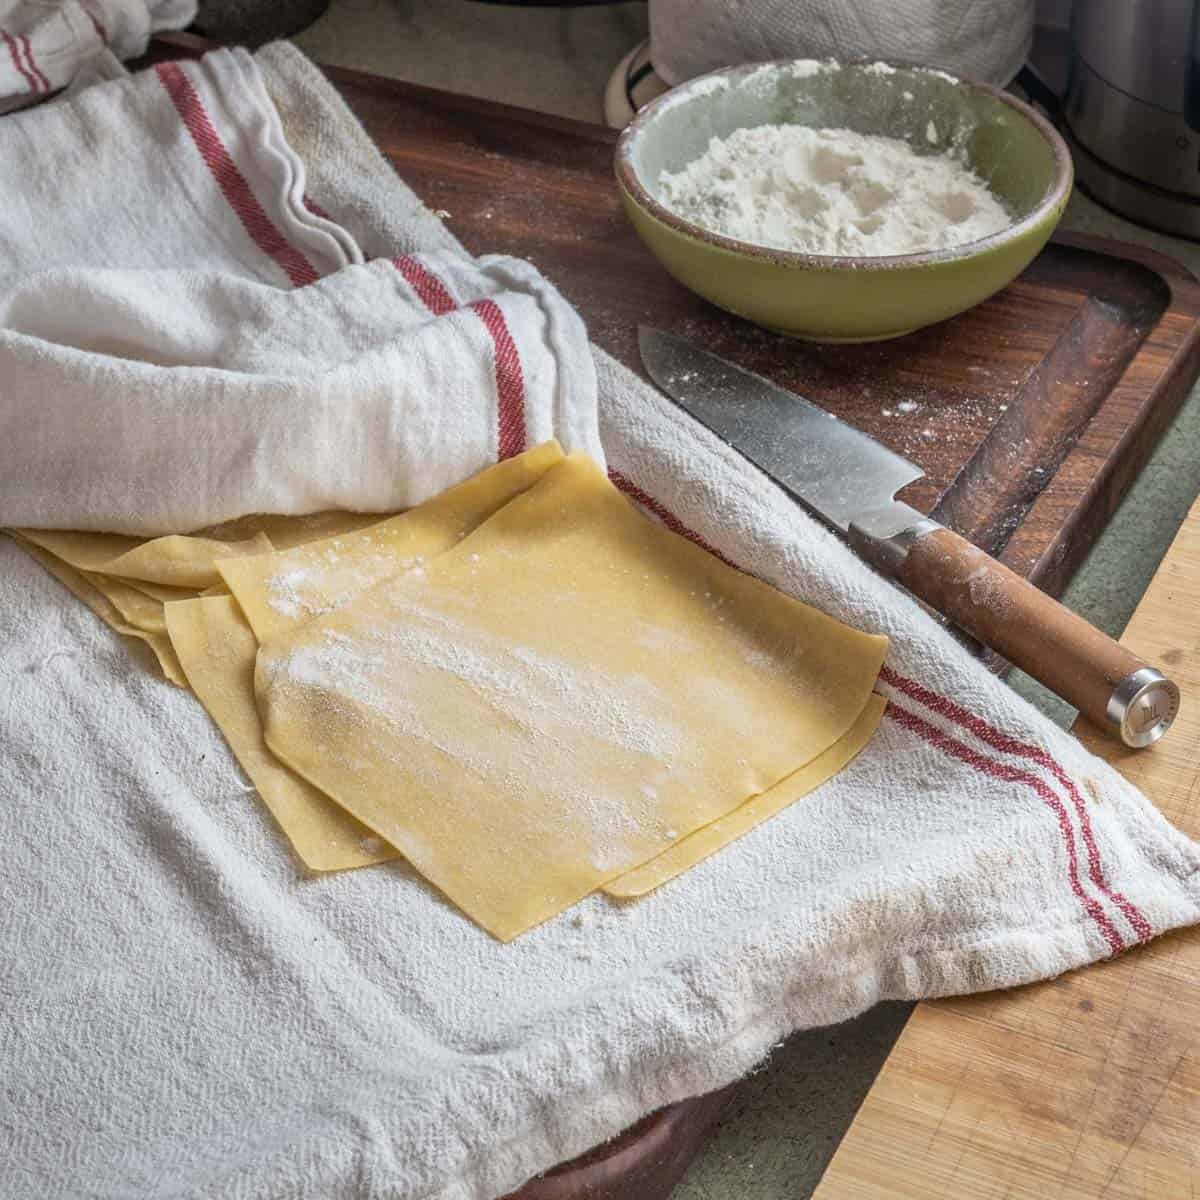 pasta on a tray between towels with a bowl of flour and a knife